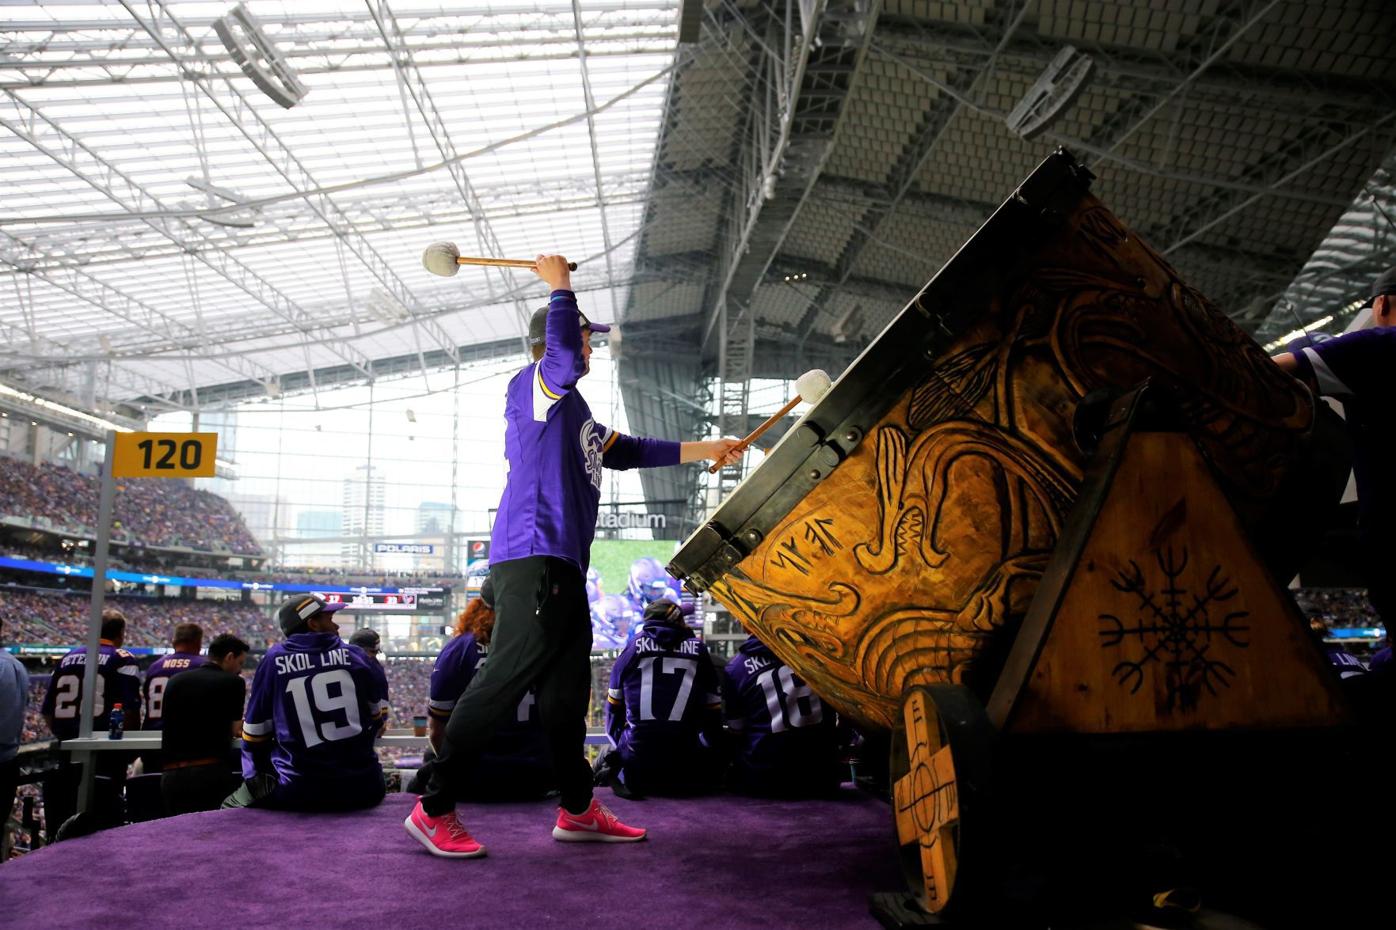 That massive drum used to rouse Vikings fans? Credit Nerstrand's Curtis  Ingvoldstad | News | southernminn.com